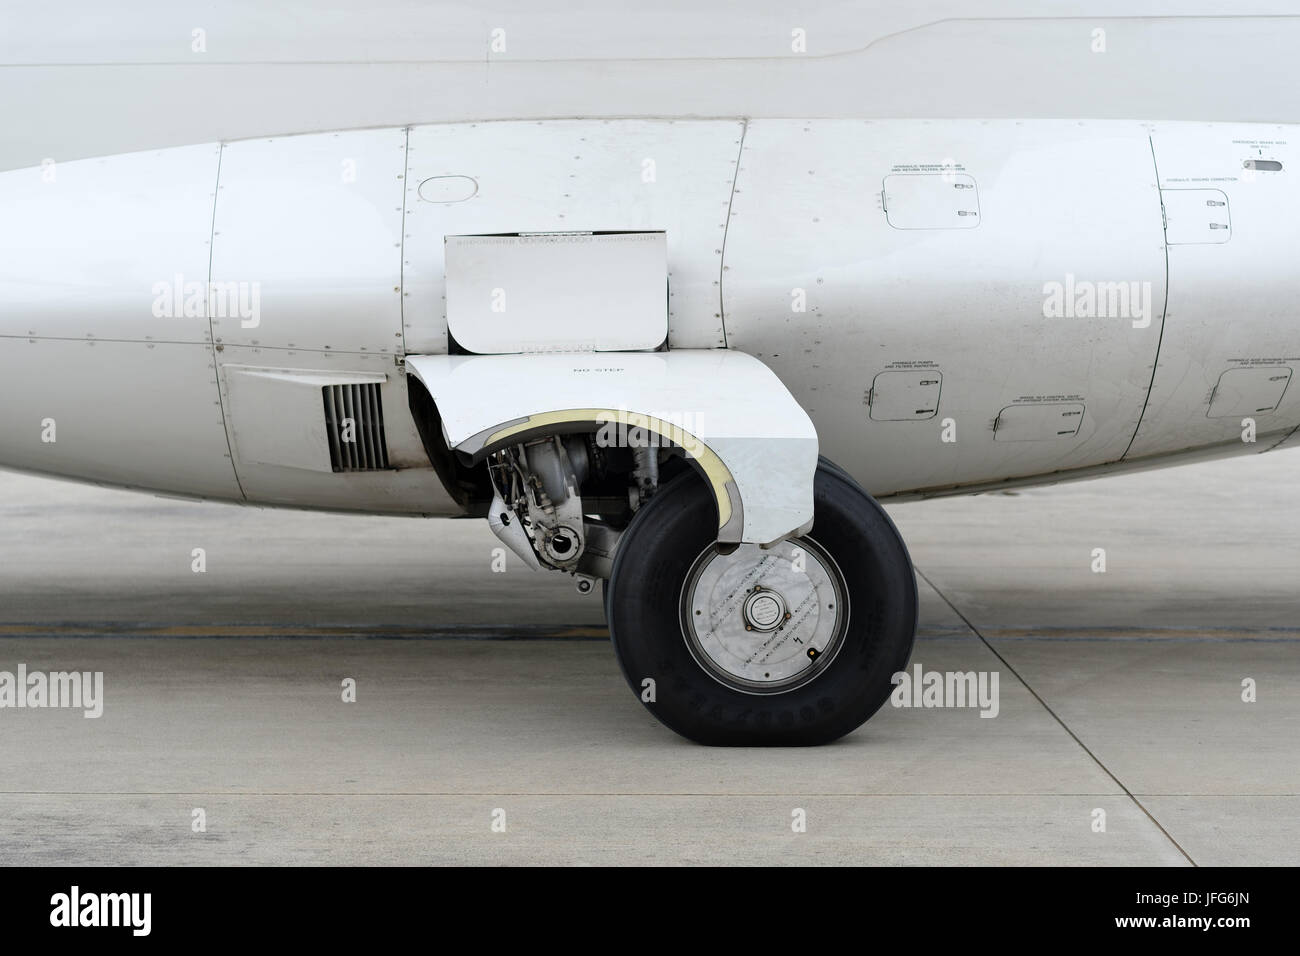 Airplane wheels and landing gear Stock Photo